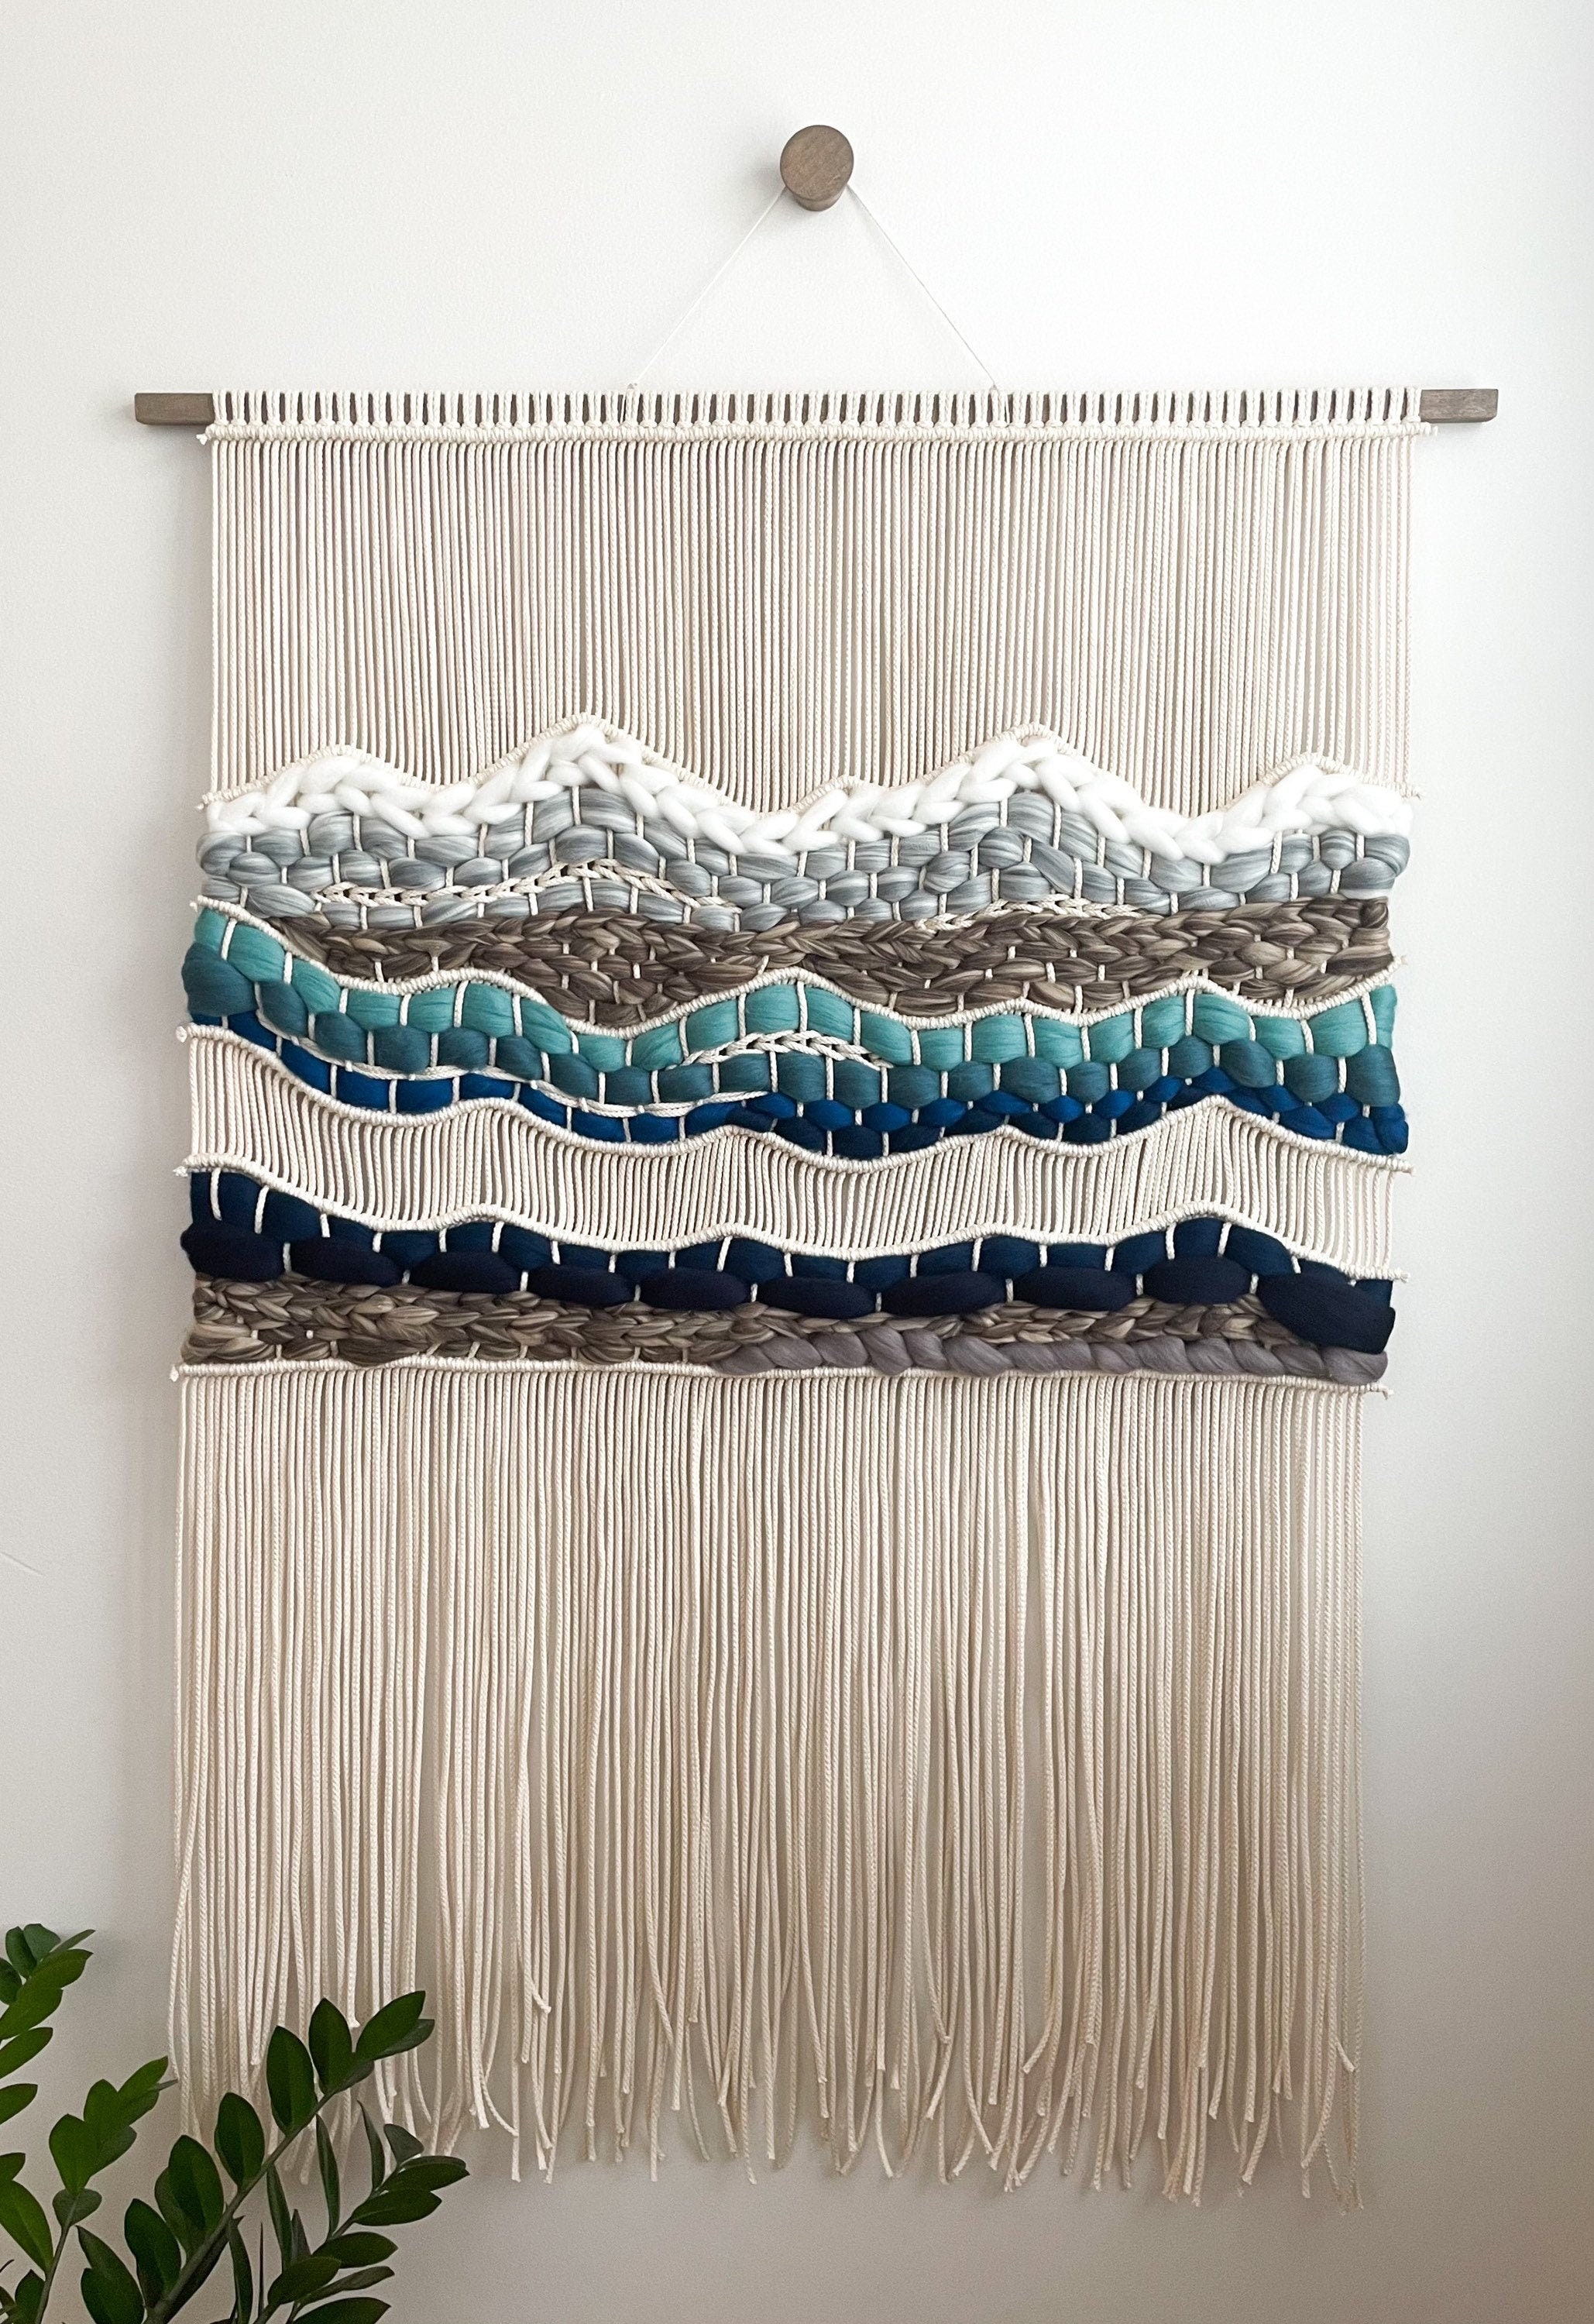 Nature Macramé: 20+ Stunning Projects Inspired by Mountains